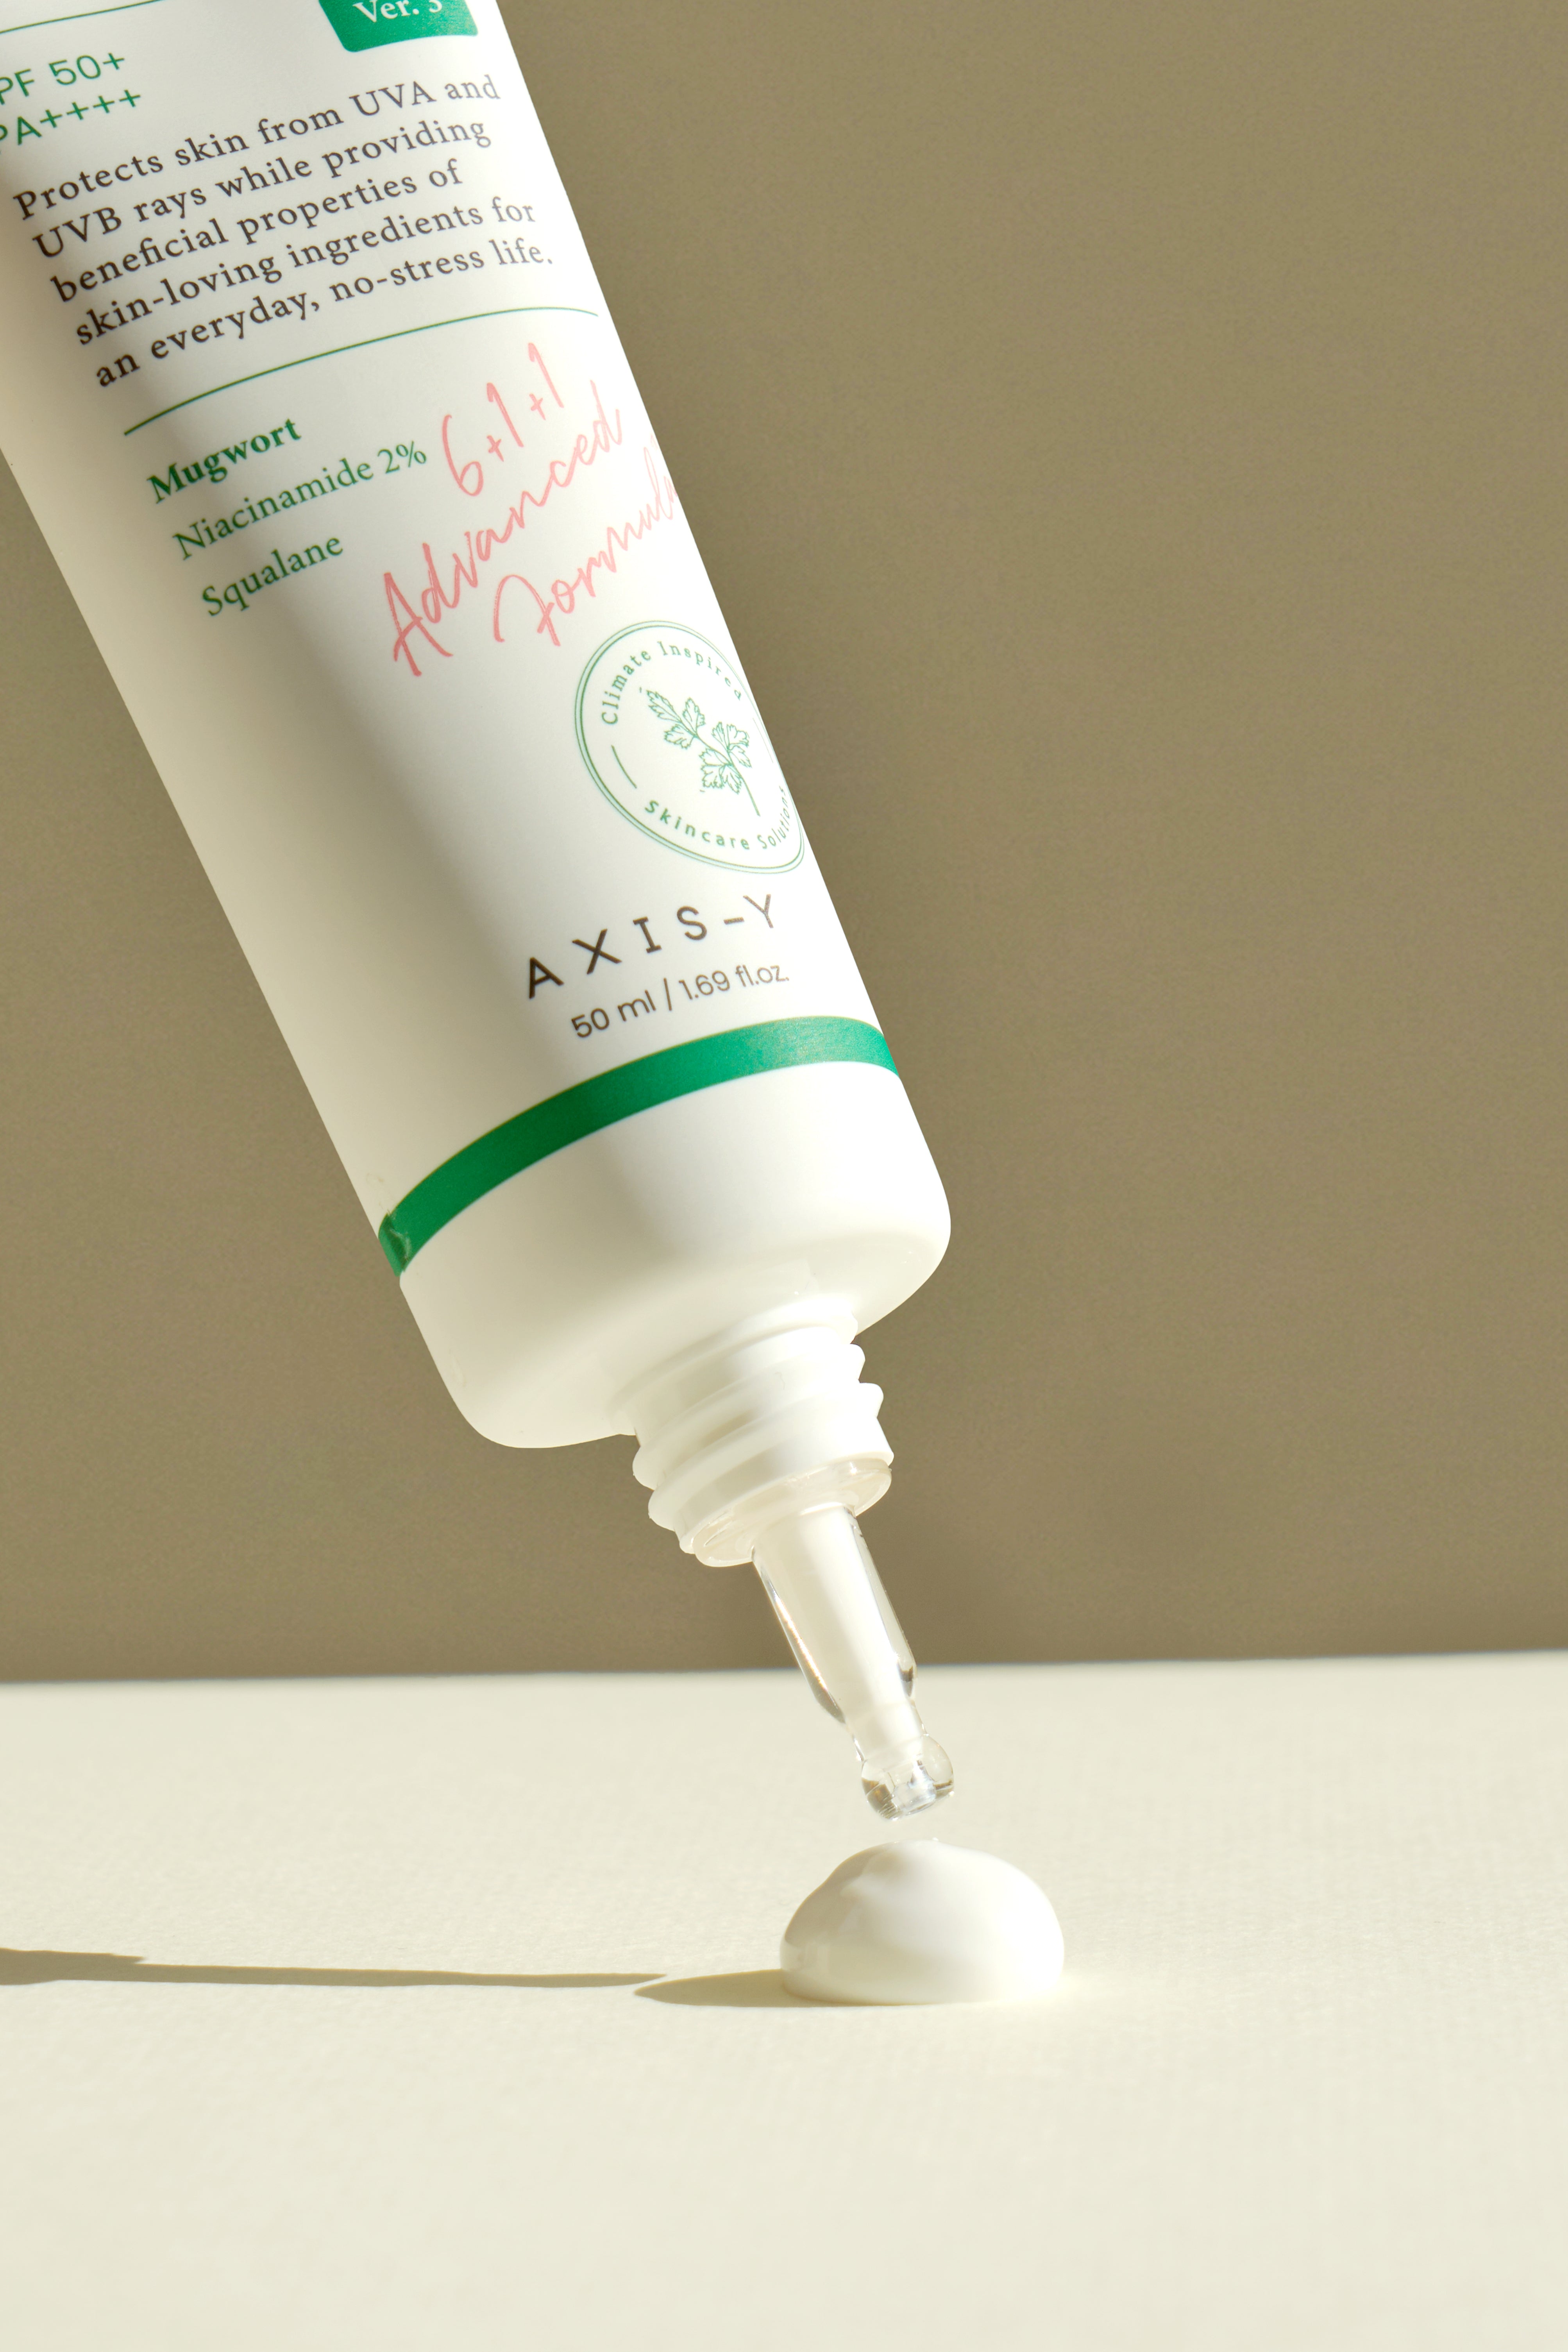 Axis-Y Complete No-Stress Physical Sunscreen